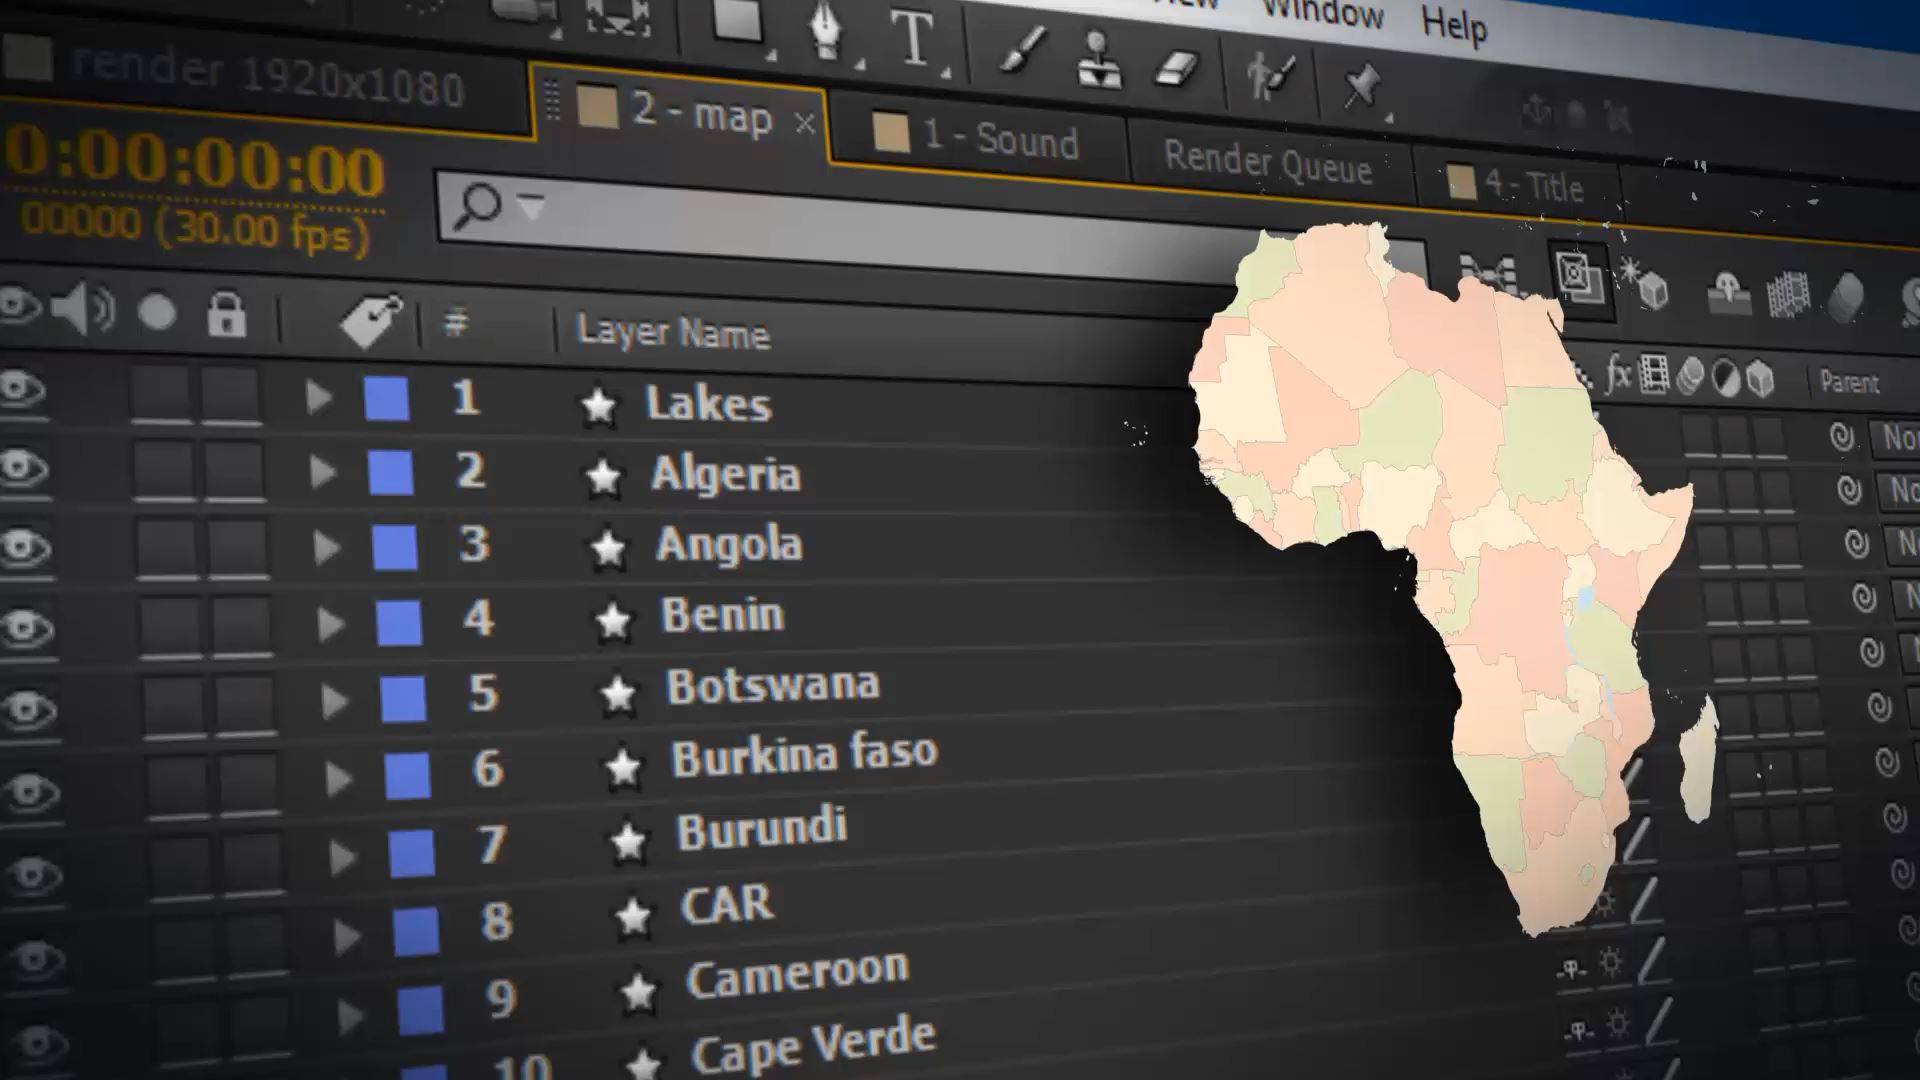  Africa Animated Map - Africa Map Kit 